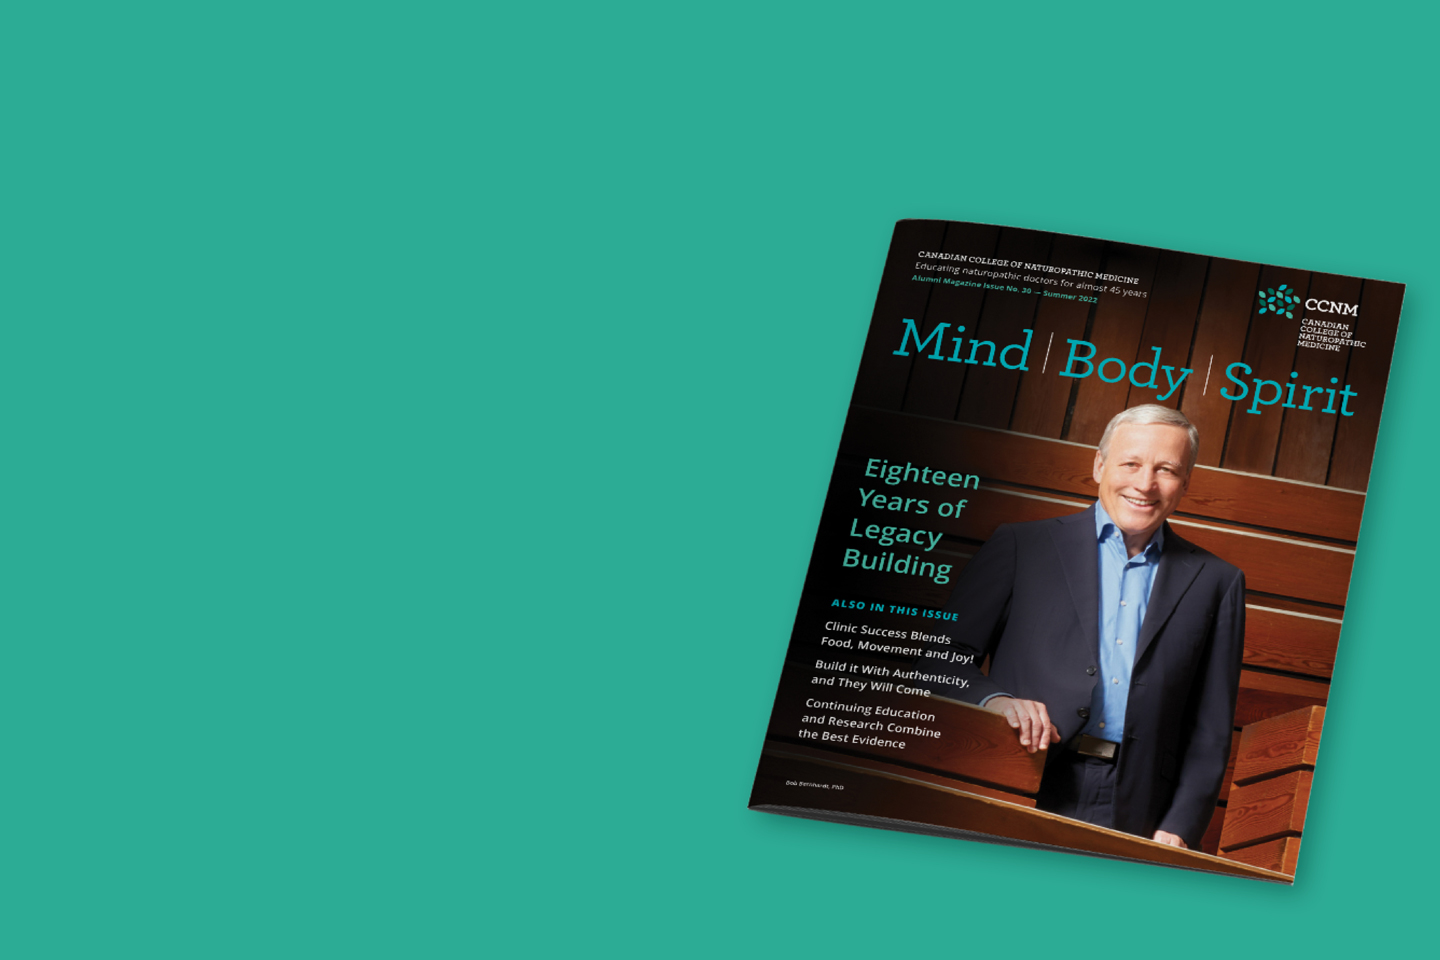 picture of the cover and inside of CCNM's alumni magazine Mind Body Spirit